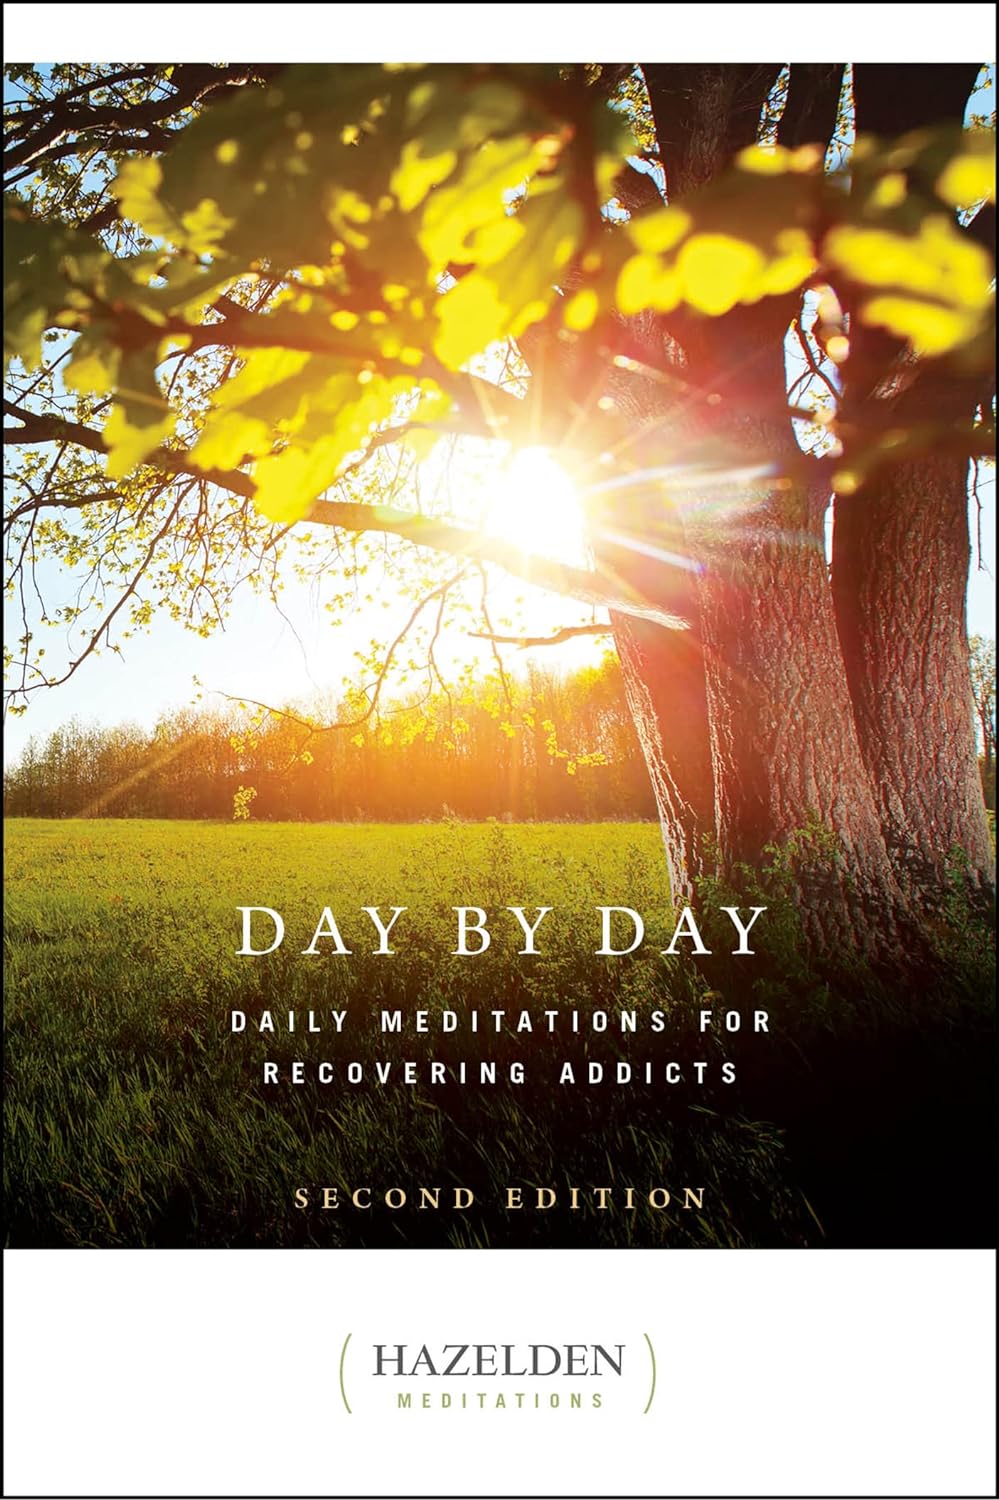 Day by Day: Daily Meditations for Recovering Addicts, Second Edition (Hazelden Meditations) (2ND ed.) - CA Corrections Book Store